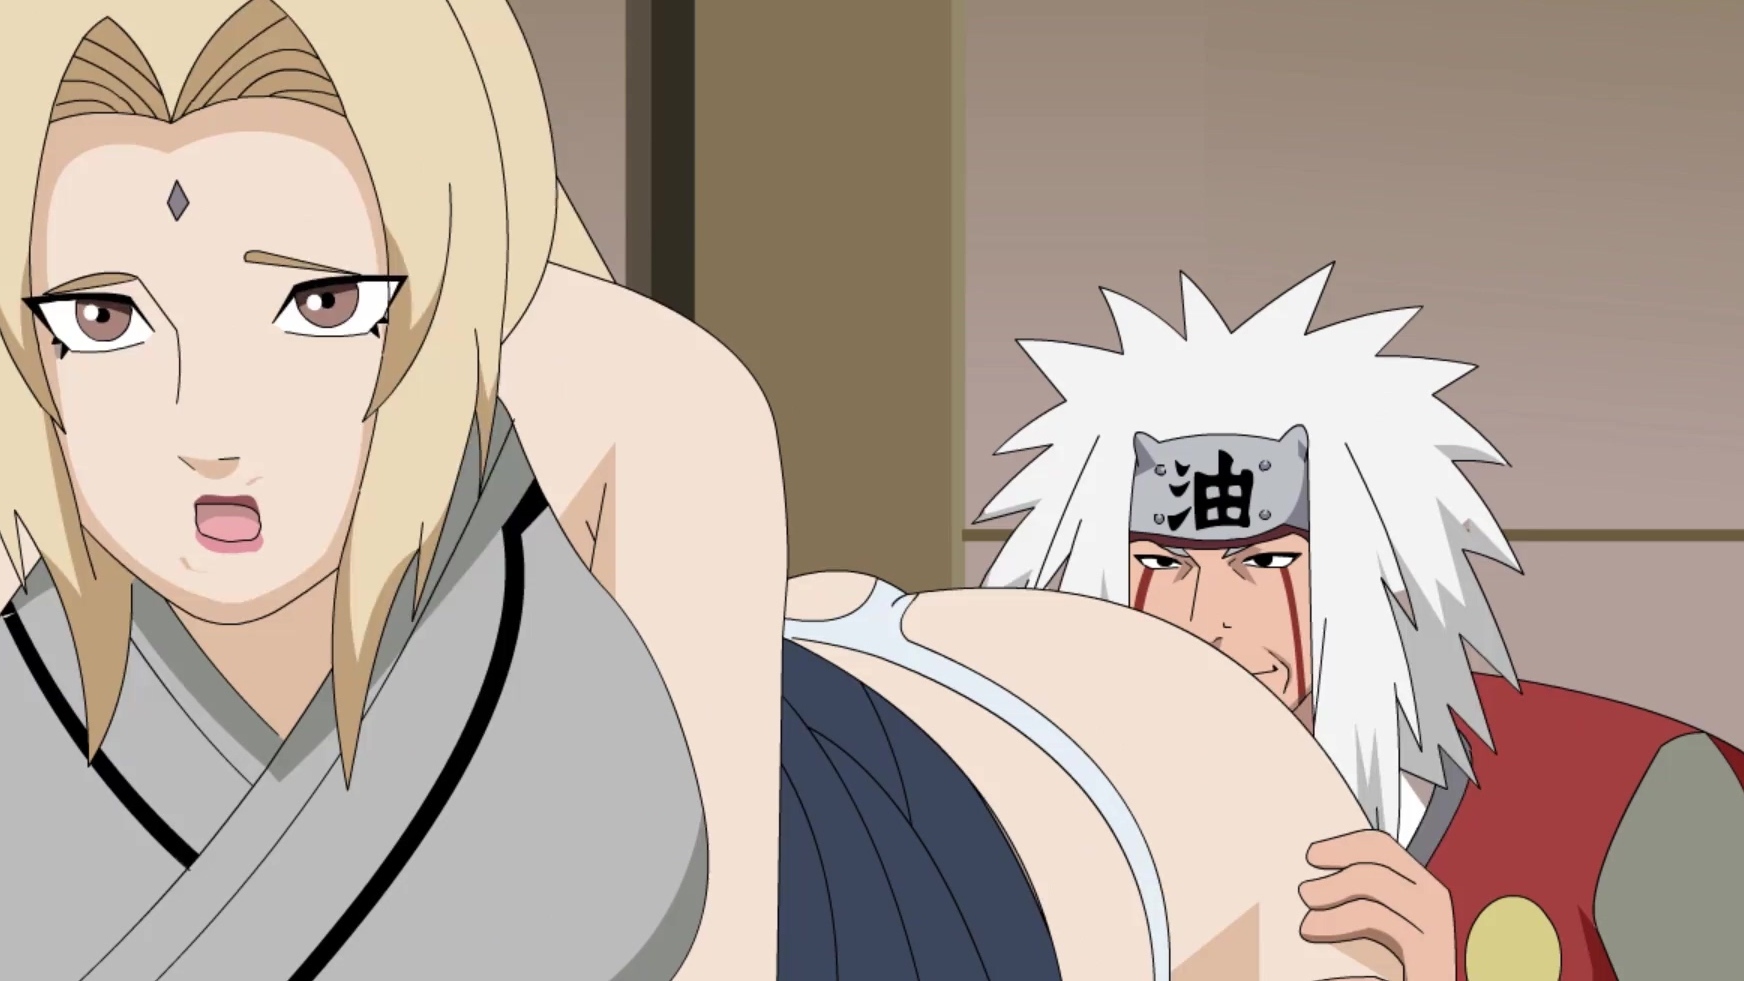 Busty Tsunade From Naruto Anime Gets A Big Dick!